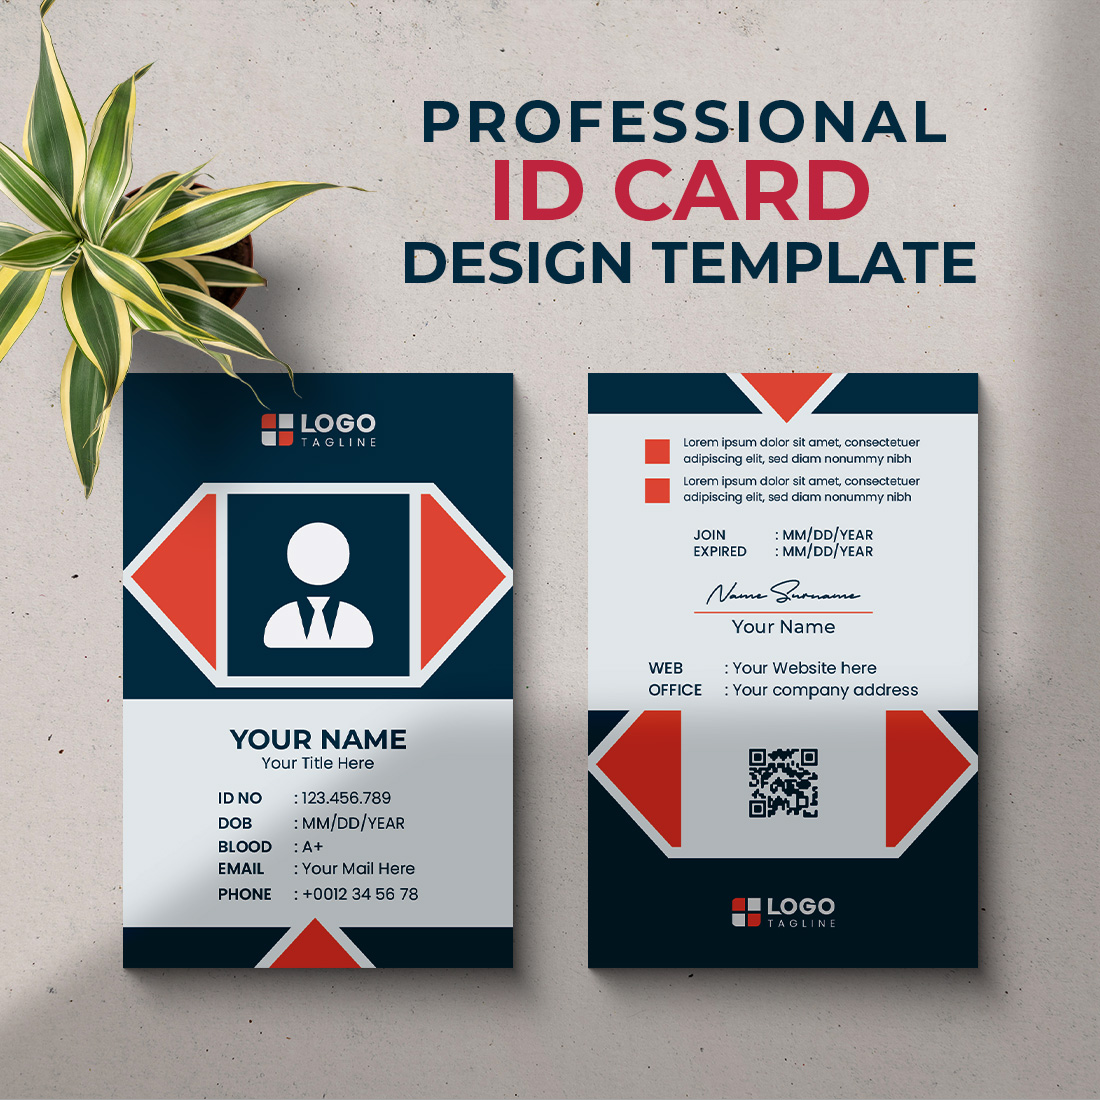 Professional id card design template with a plant next to it.